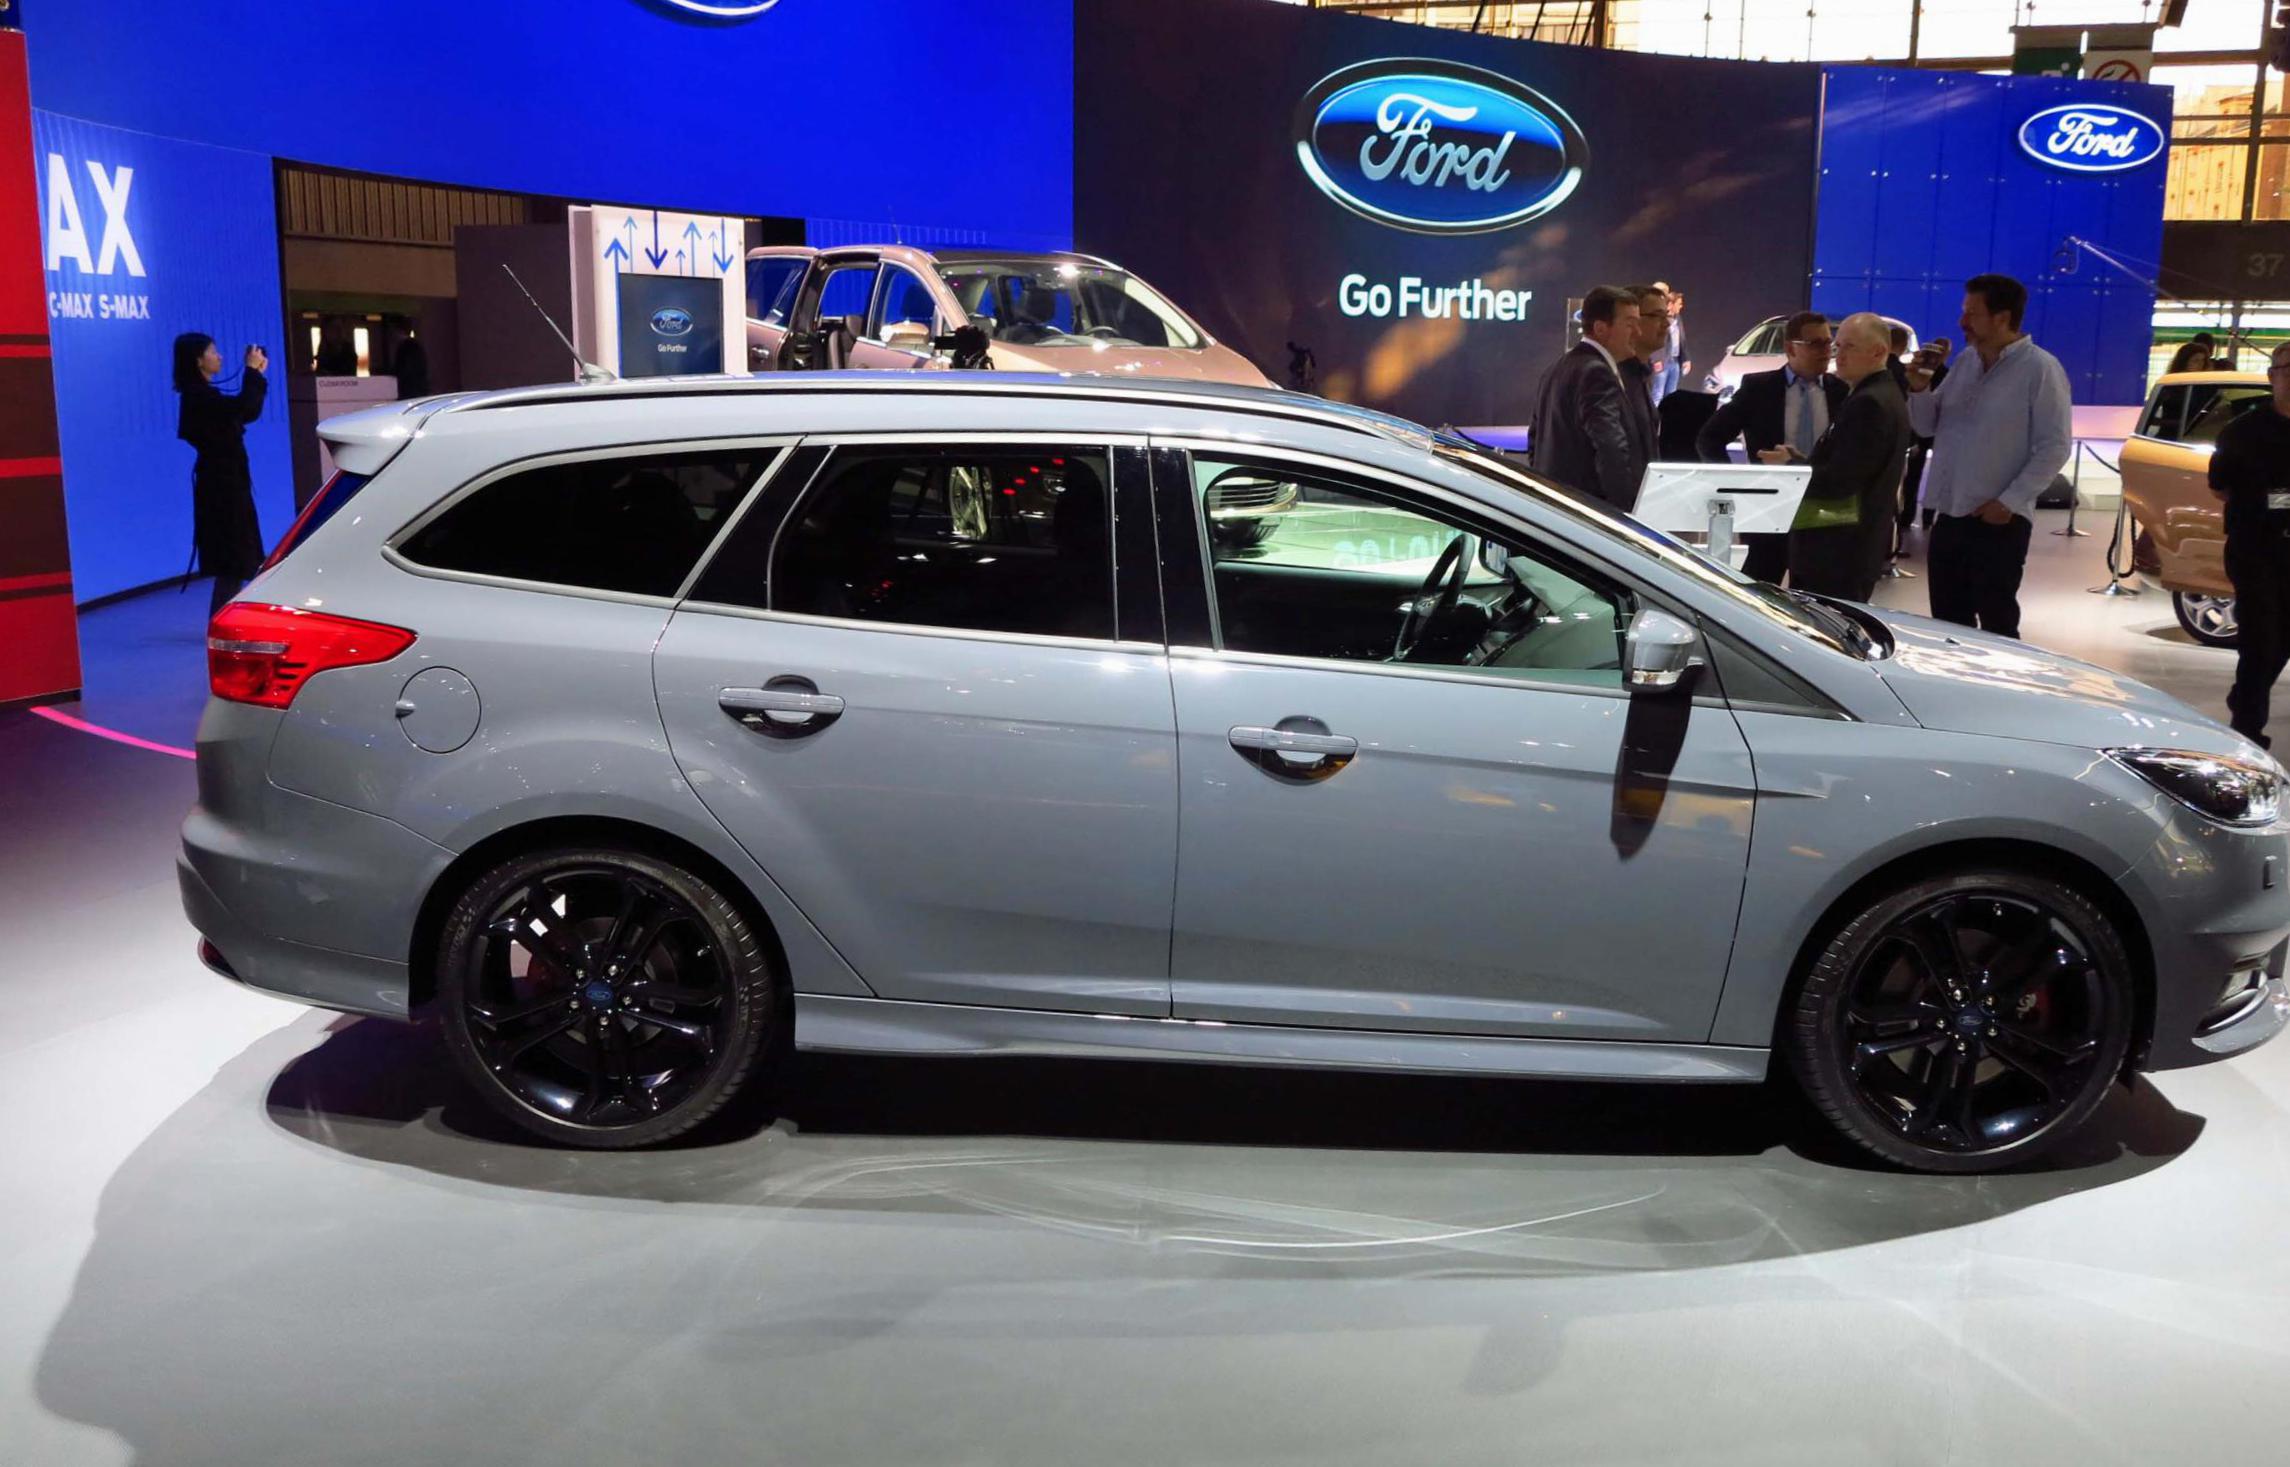 Focus Wagon Ford reviews 2014